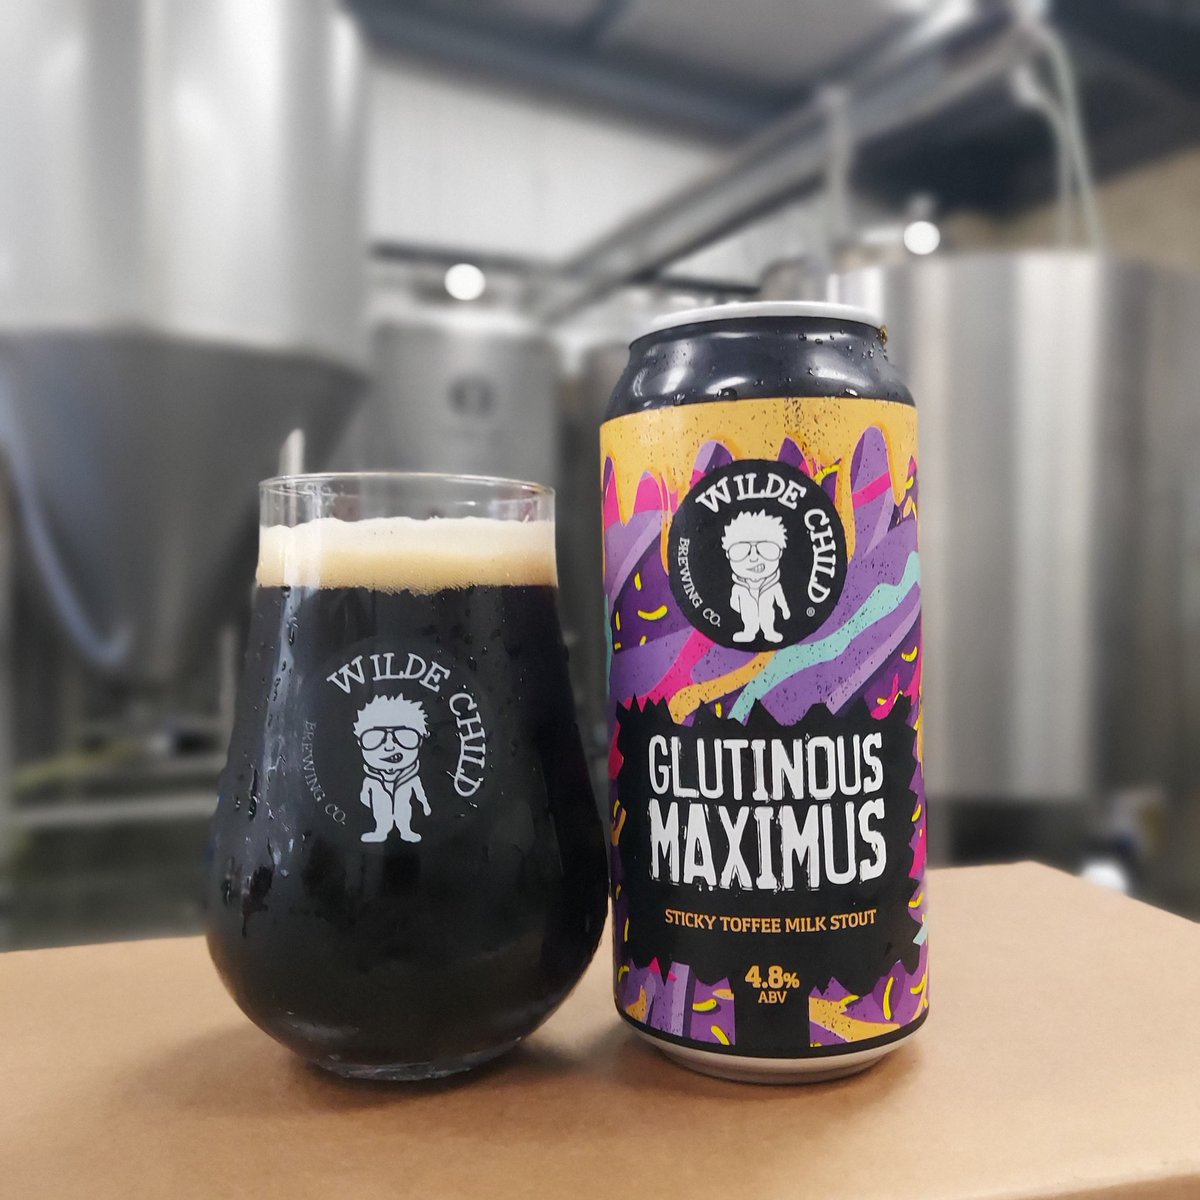 NEW CANNED BEER ALERT ! Glutinous Maximus 4.8% Sticky Toffee Milk Stout. A thick and decadent milk stout with the taste of a firm family favourite dessert and another @Ronseal beer🥧🍦 On our website now where we also have our January sale with up to 50% off some products 🔥🍺